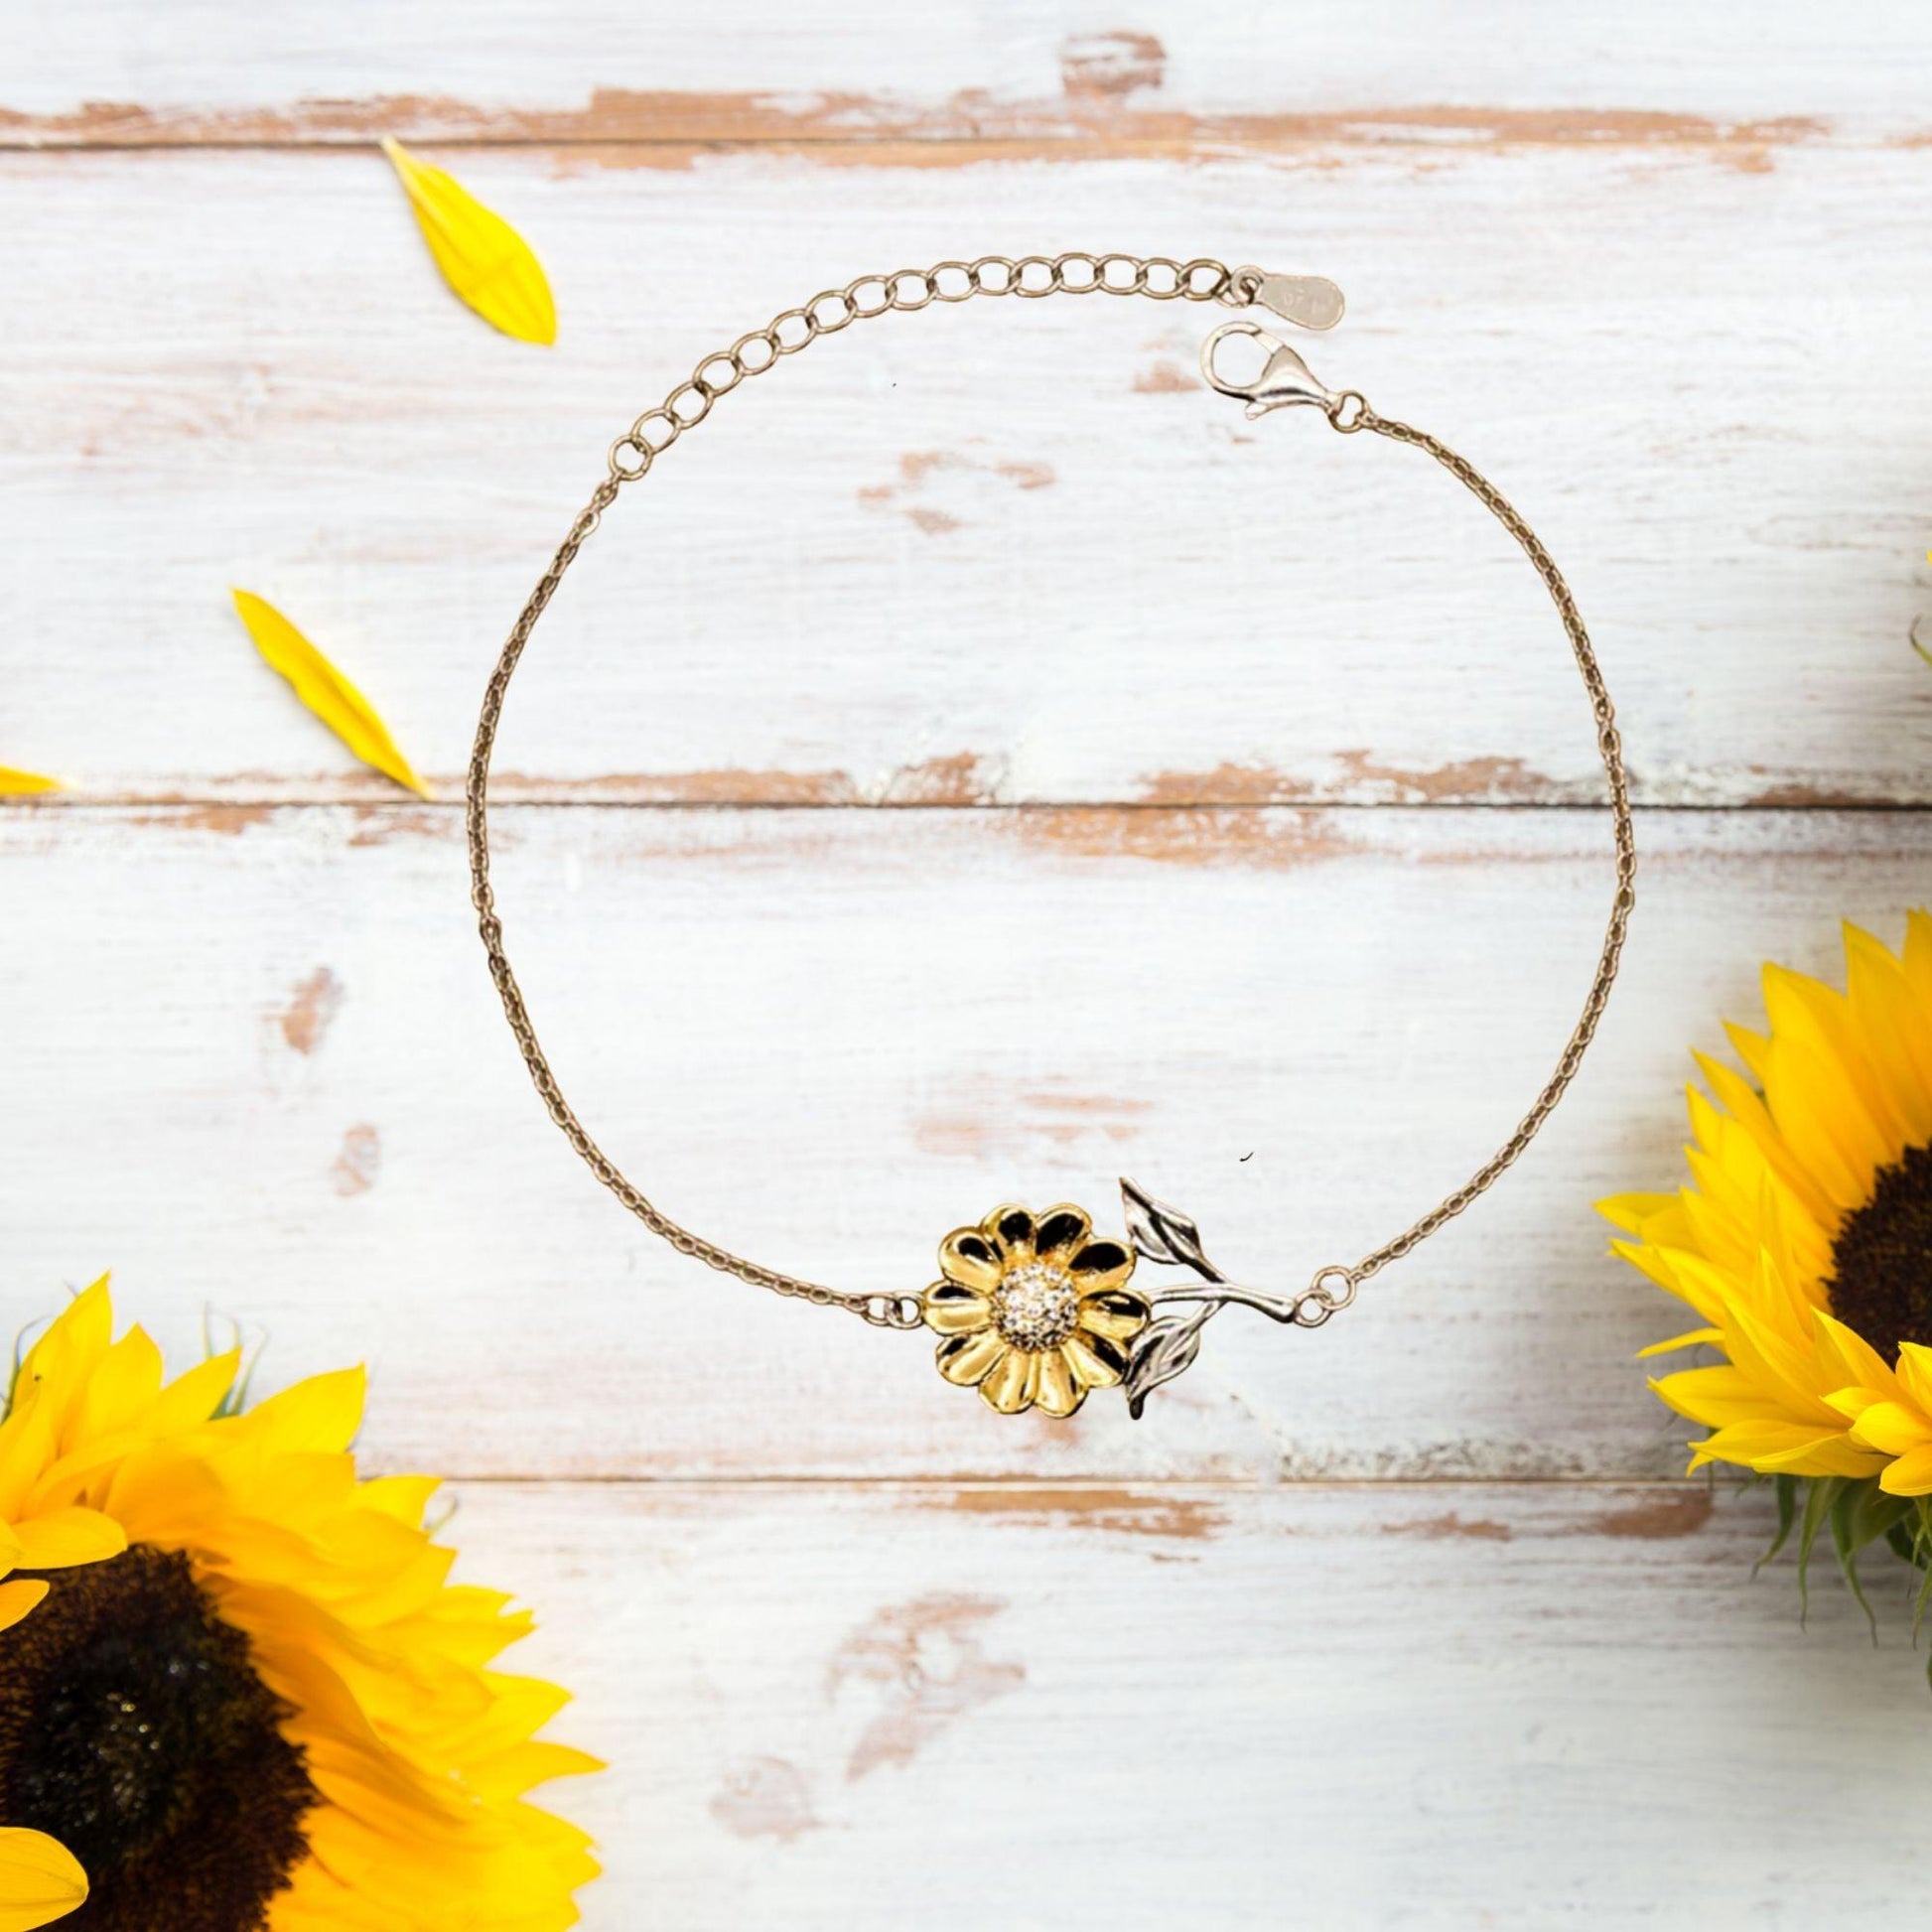 Father-In-Law Sunflower Bracelet - Always Follow your Dreams - Birthday, Christmas Holiday Jewelry Gift - Mallard Moon Gift Shop